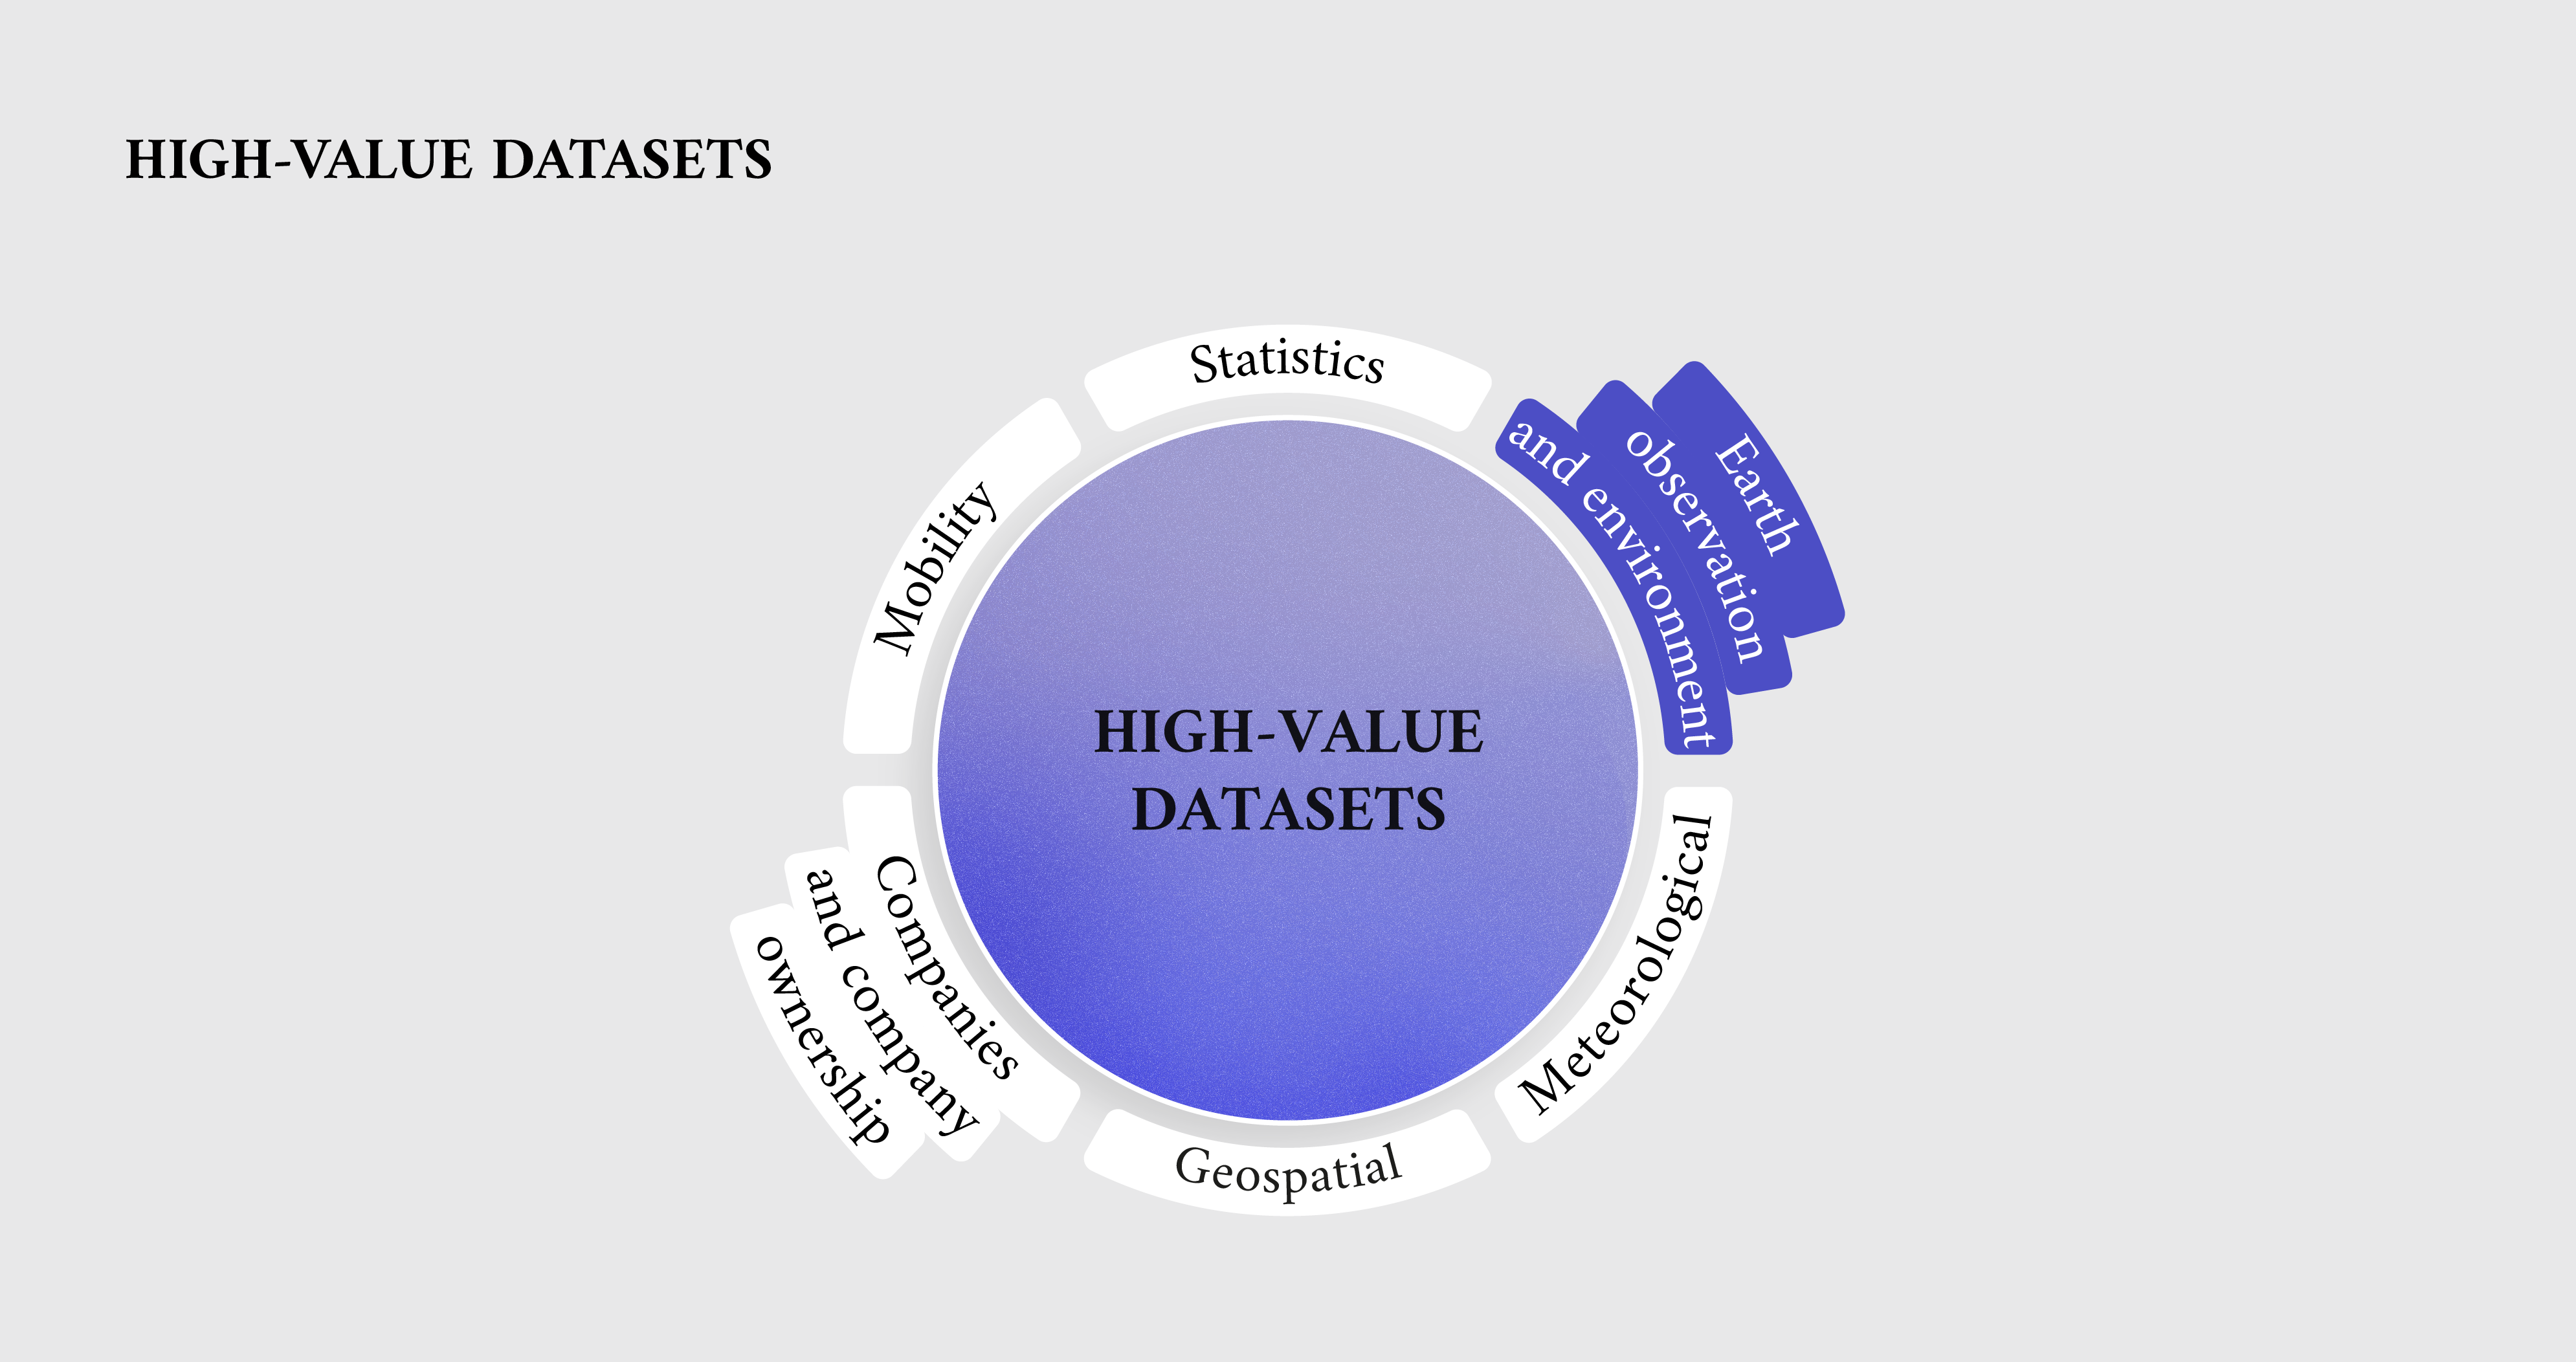 Characteristics of high-value datasets